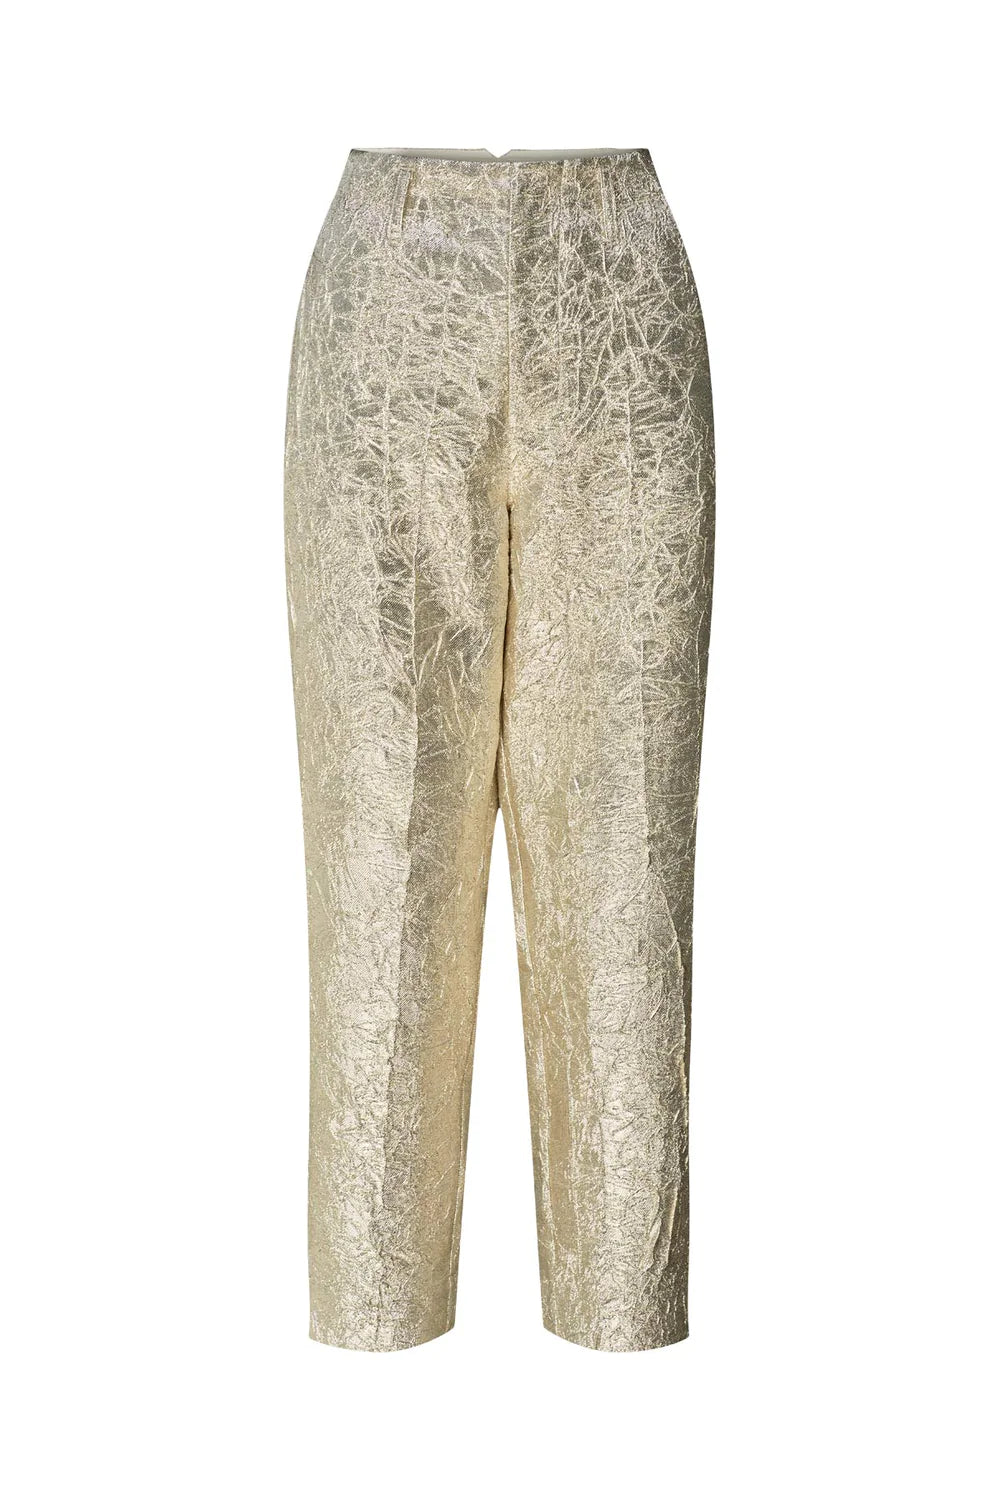 Bello - Radiant Straight Fit Pant